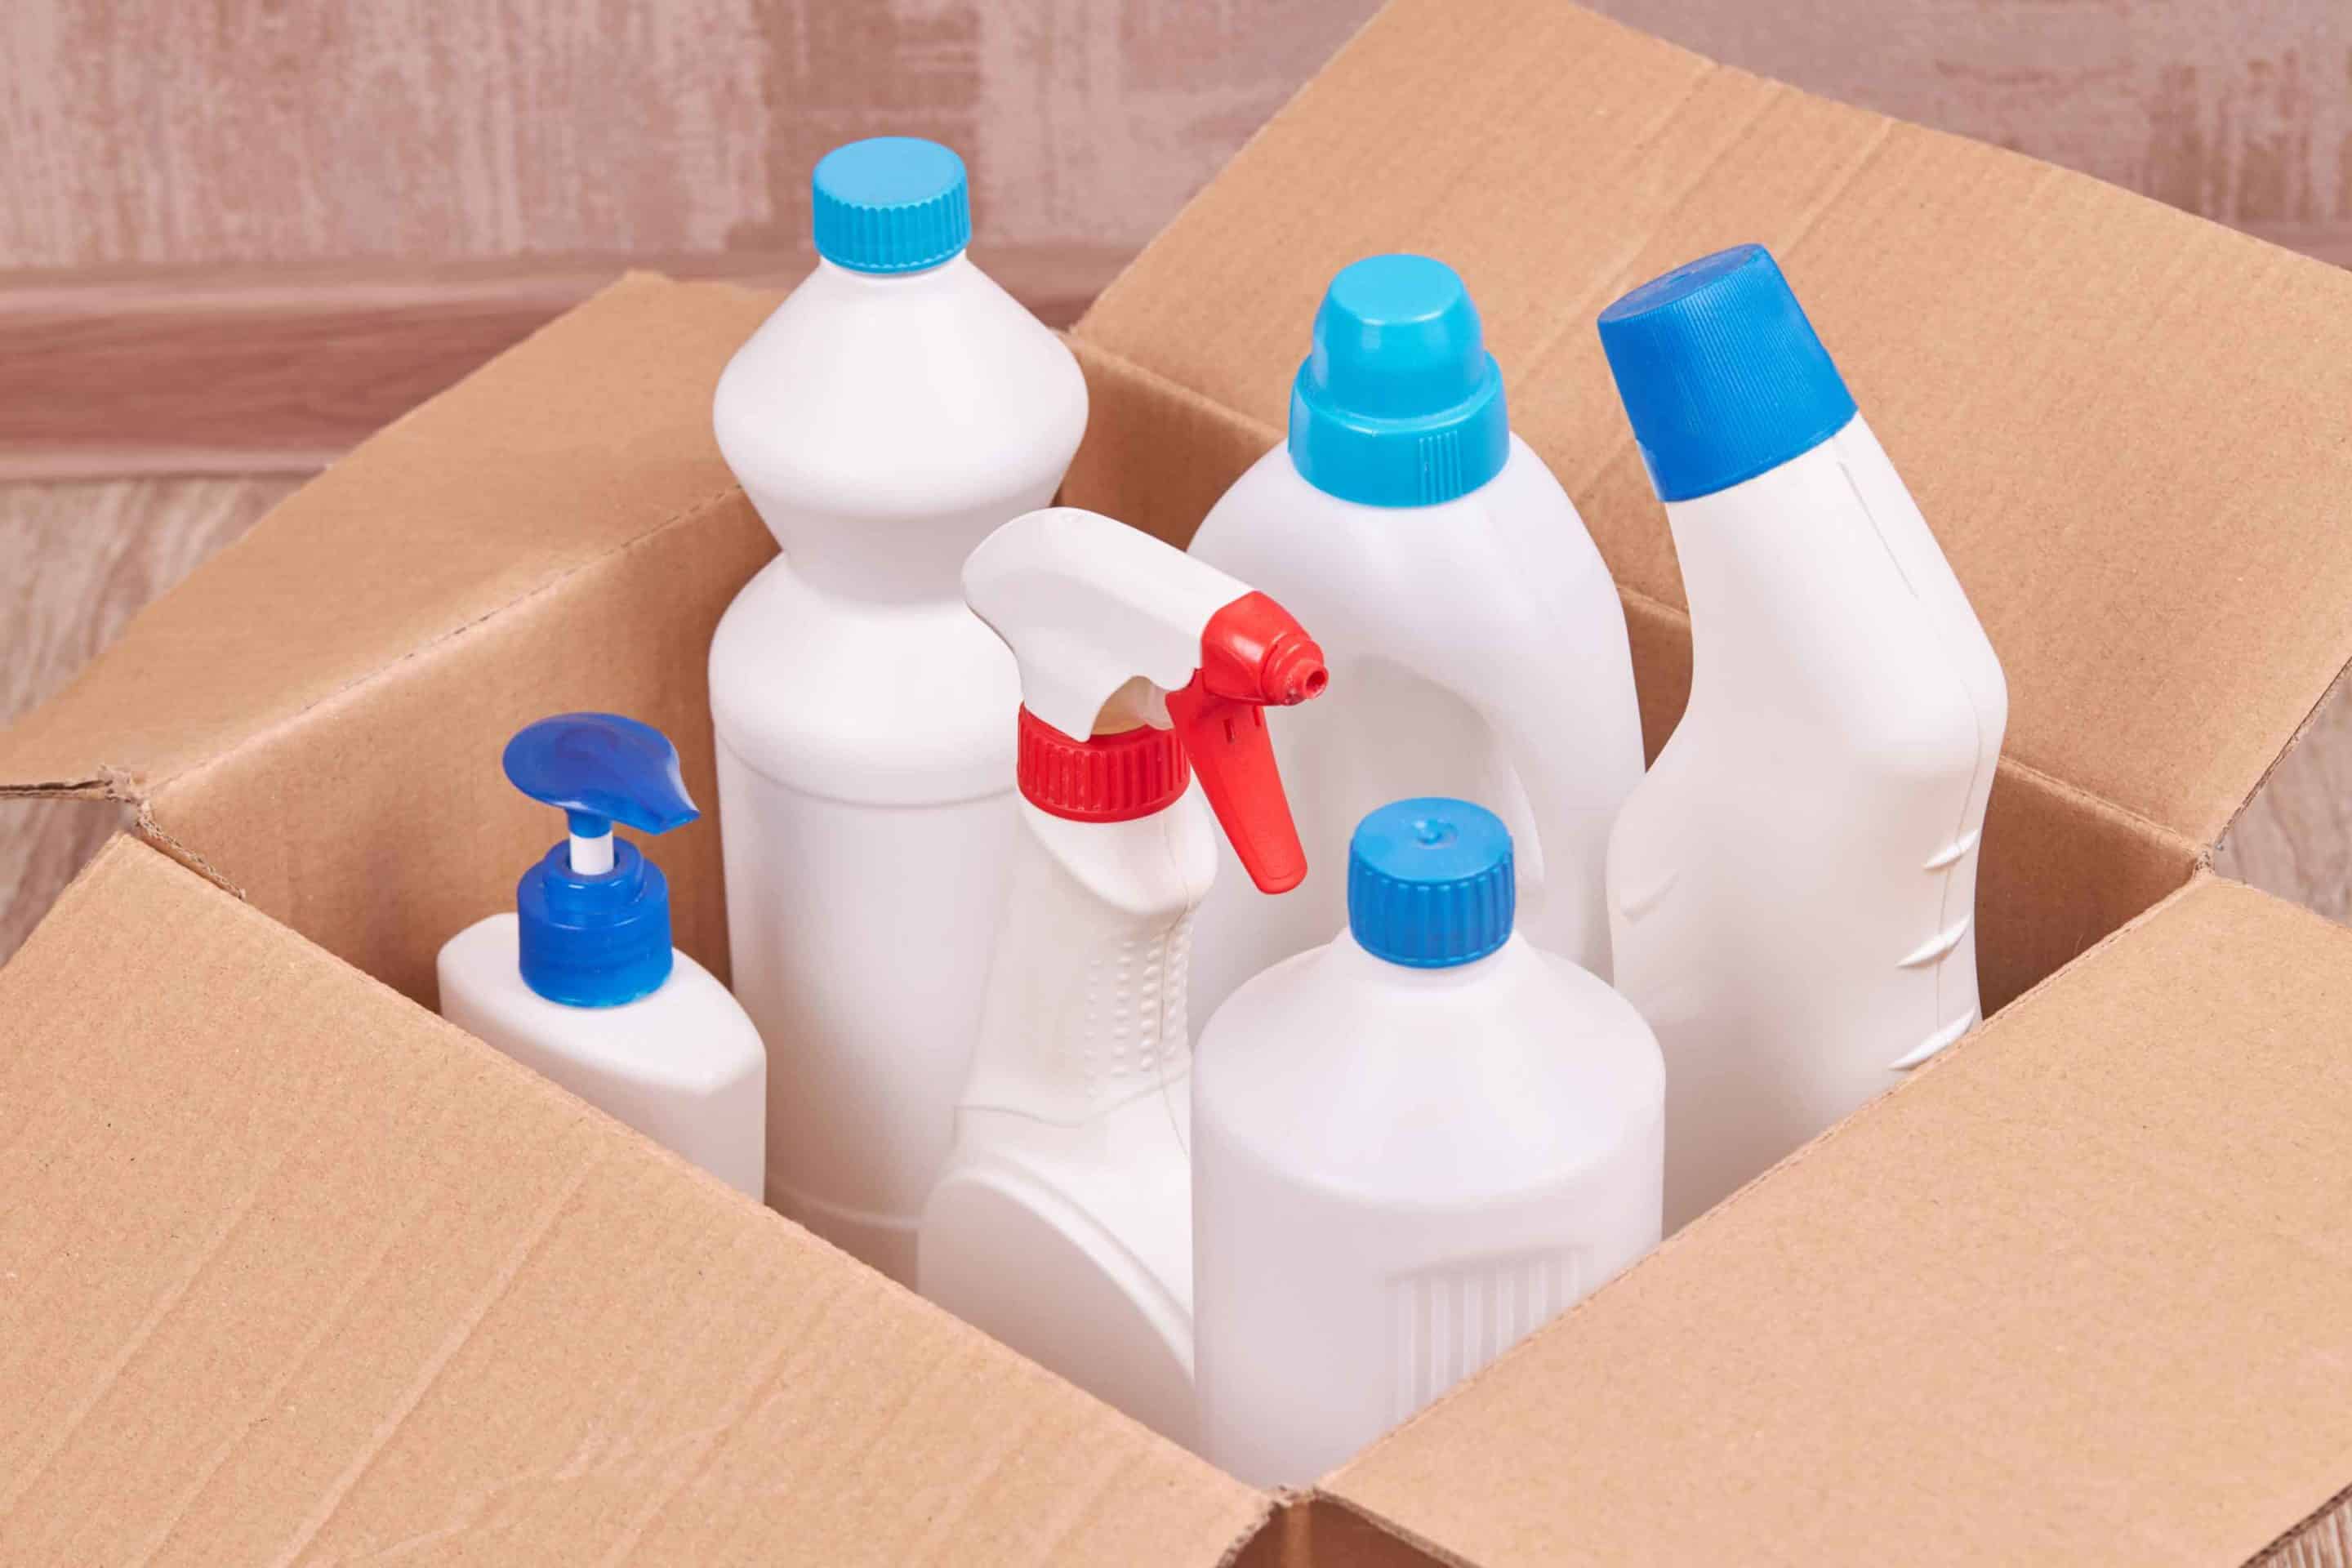 Cleaning Materials in a Box — Cleaning Supplies in Aitkenvale, QLD